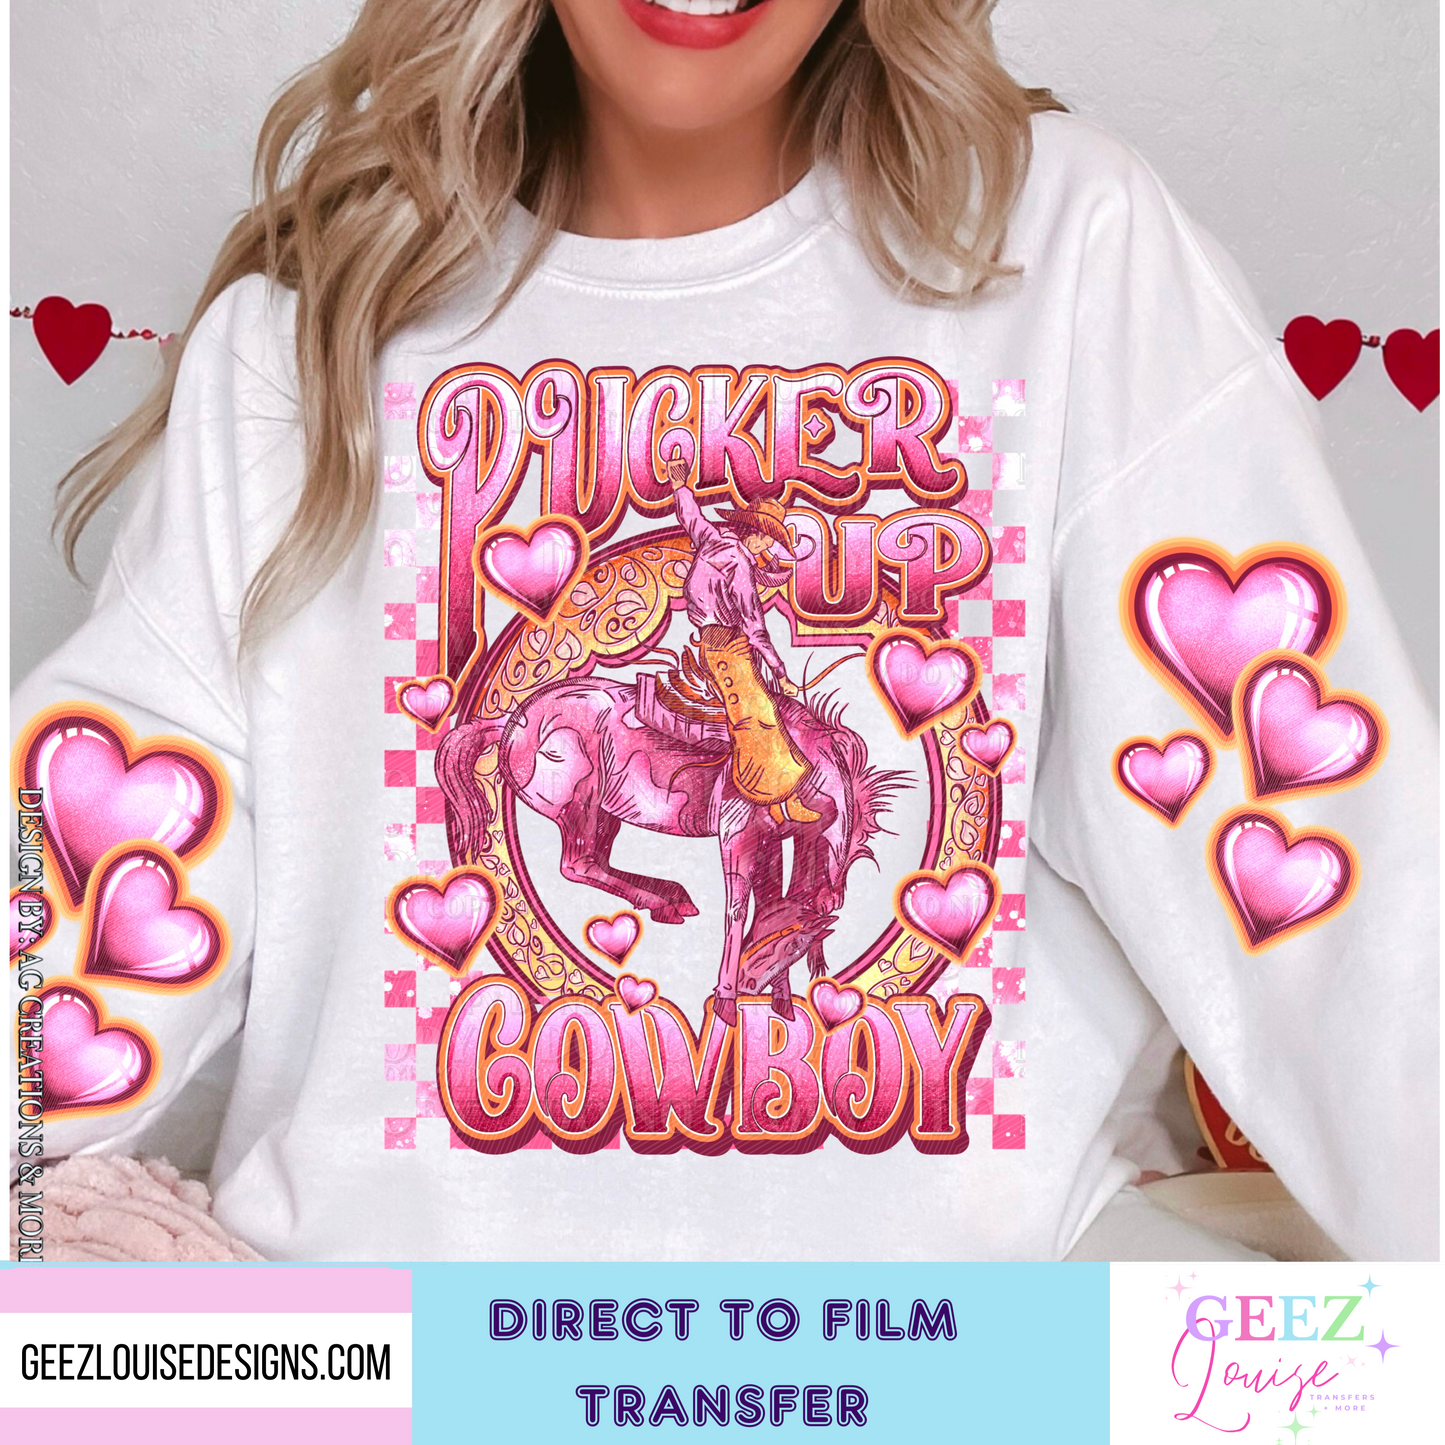 Pucker up cowboy - Direct to Film Transfer - made to order